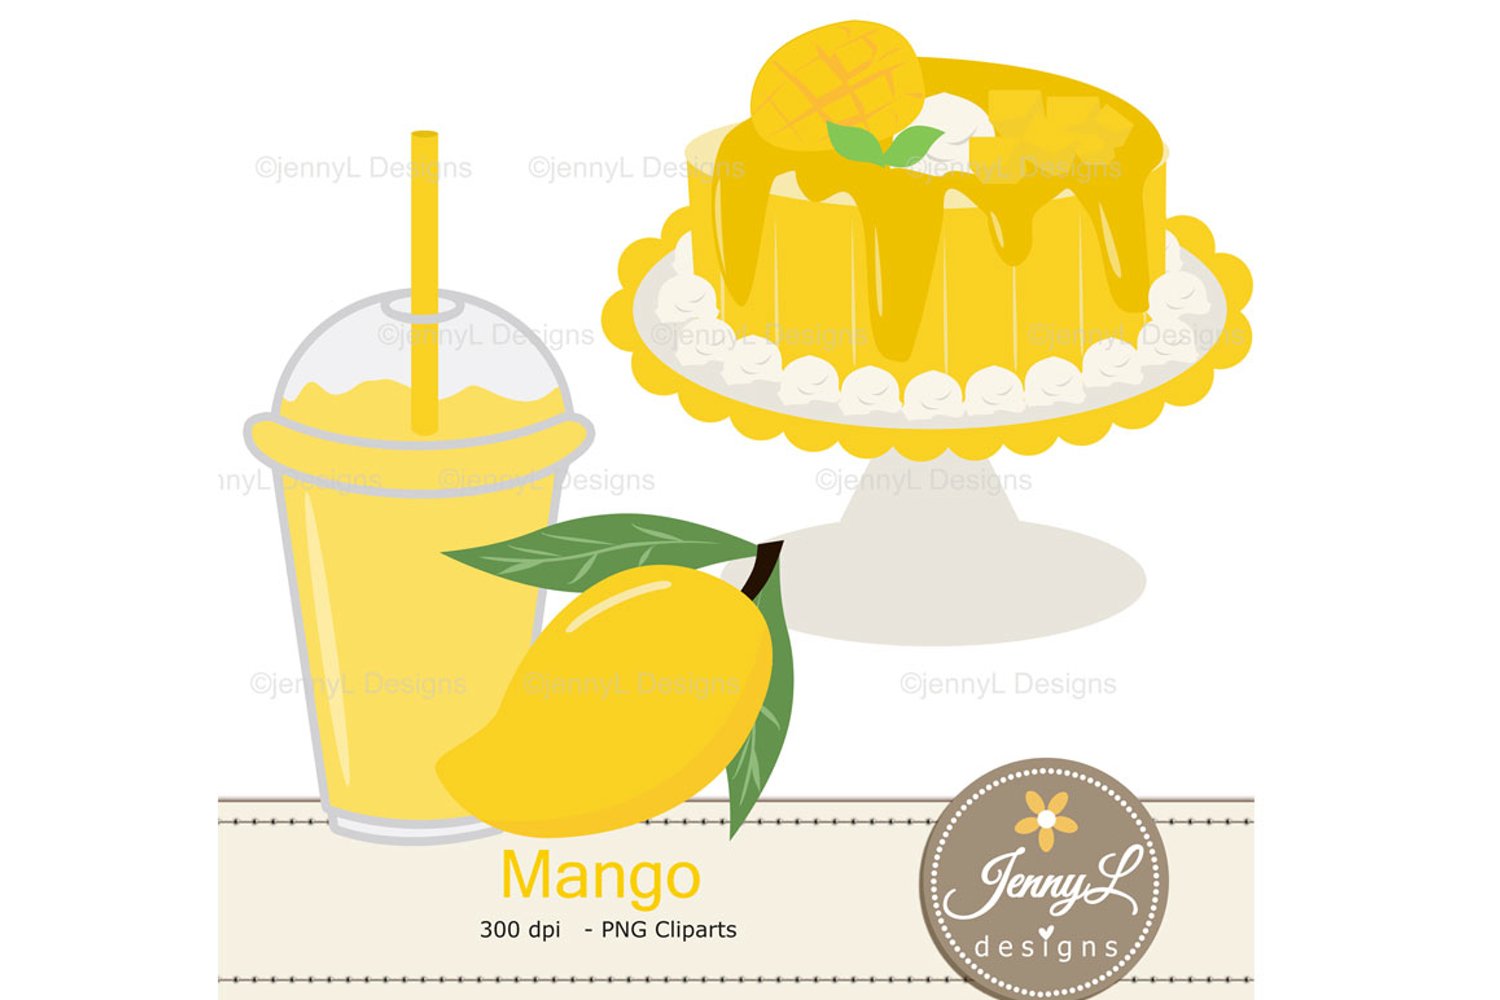 Mango cocktail and cake.